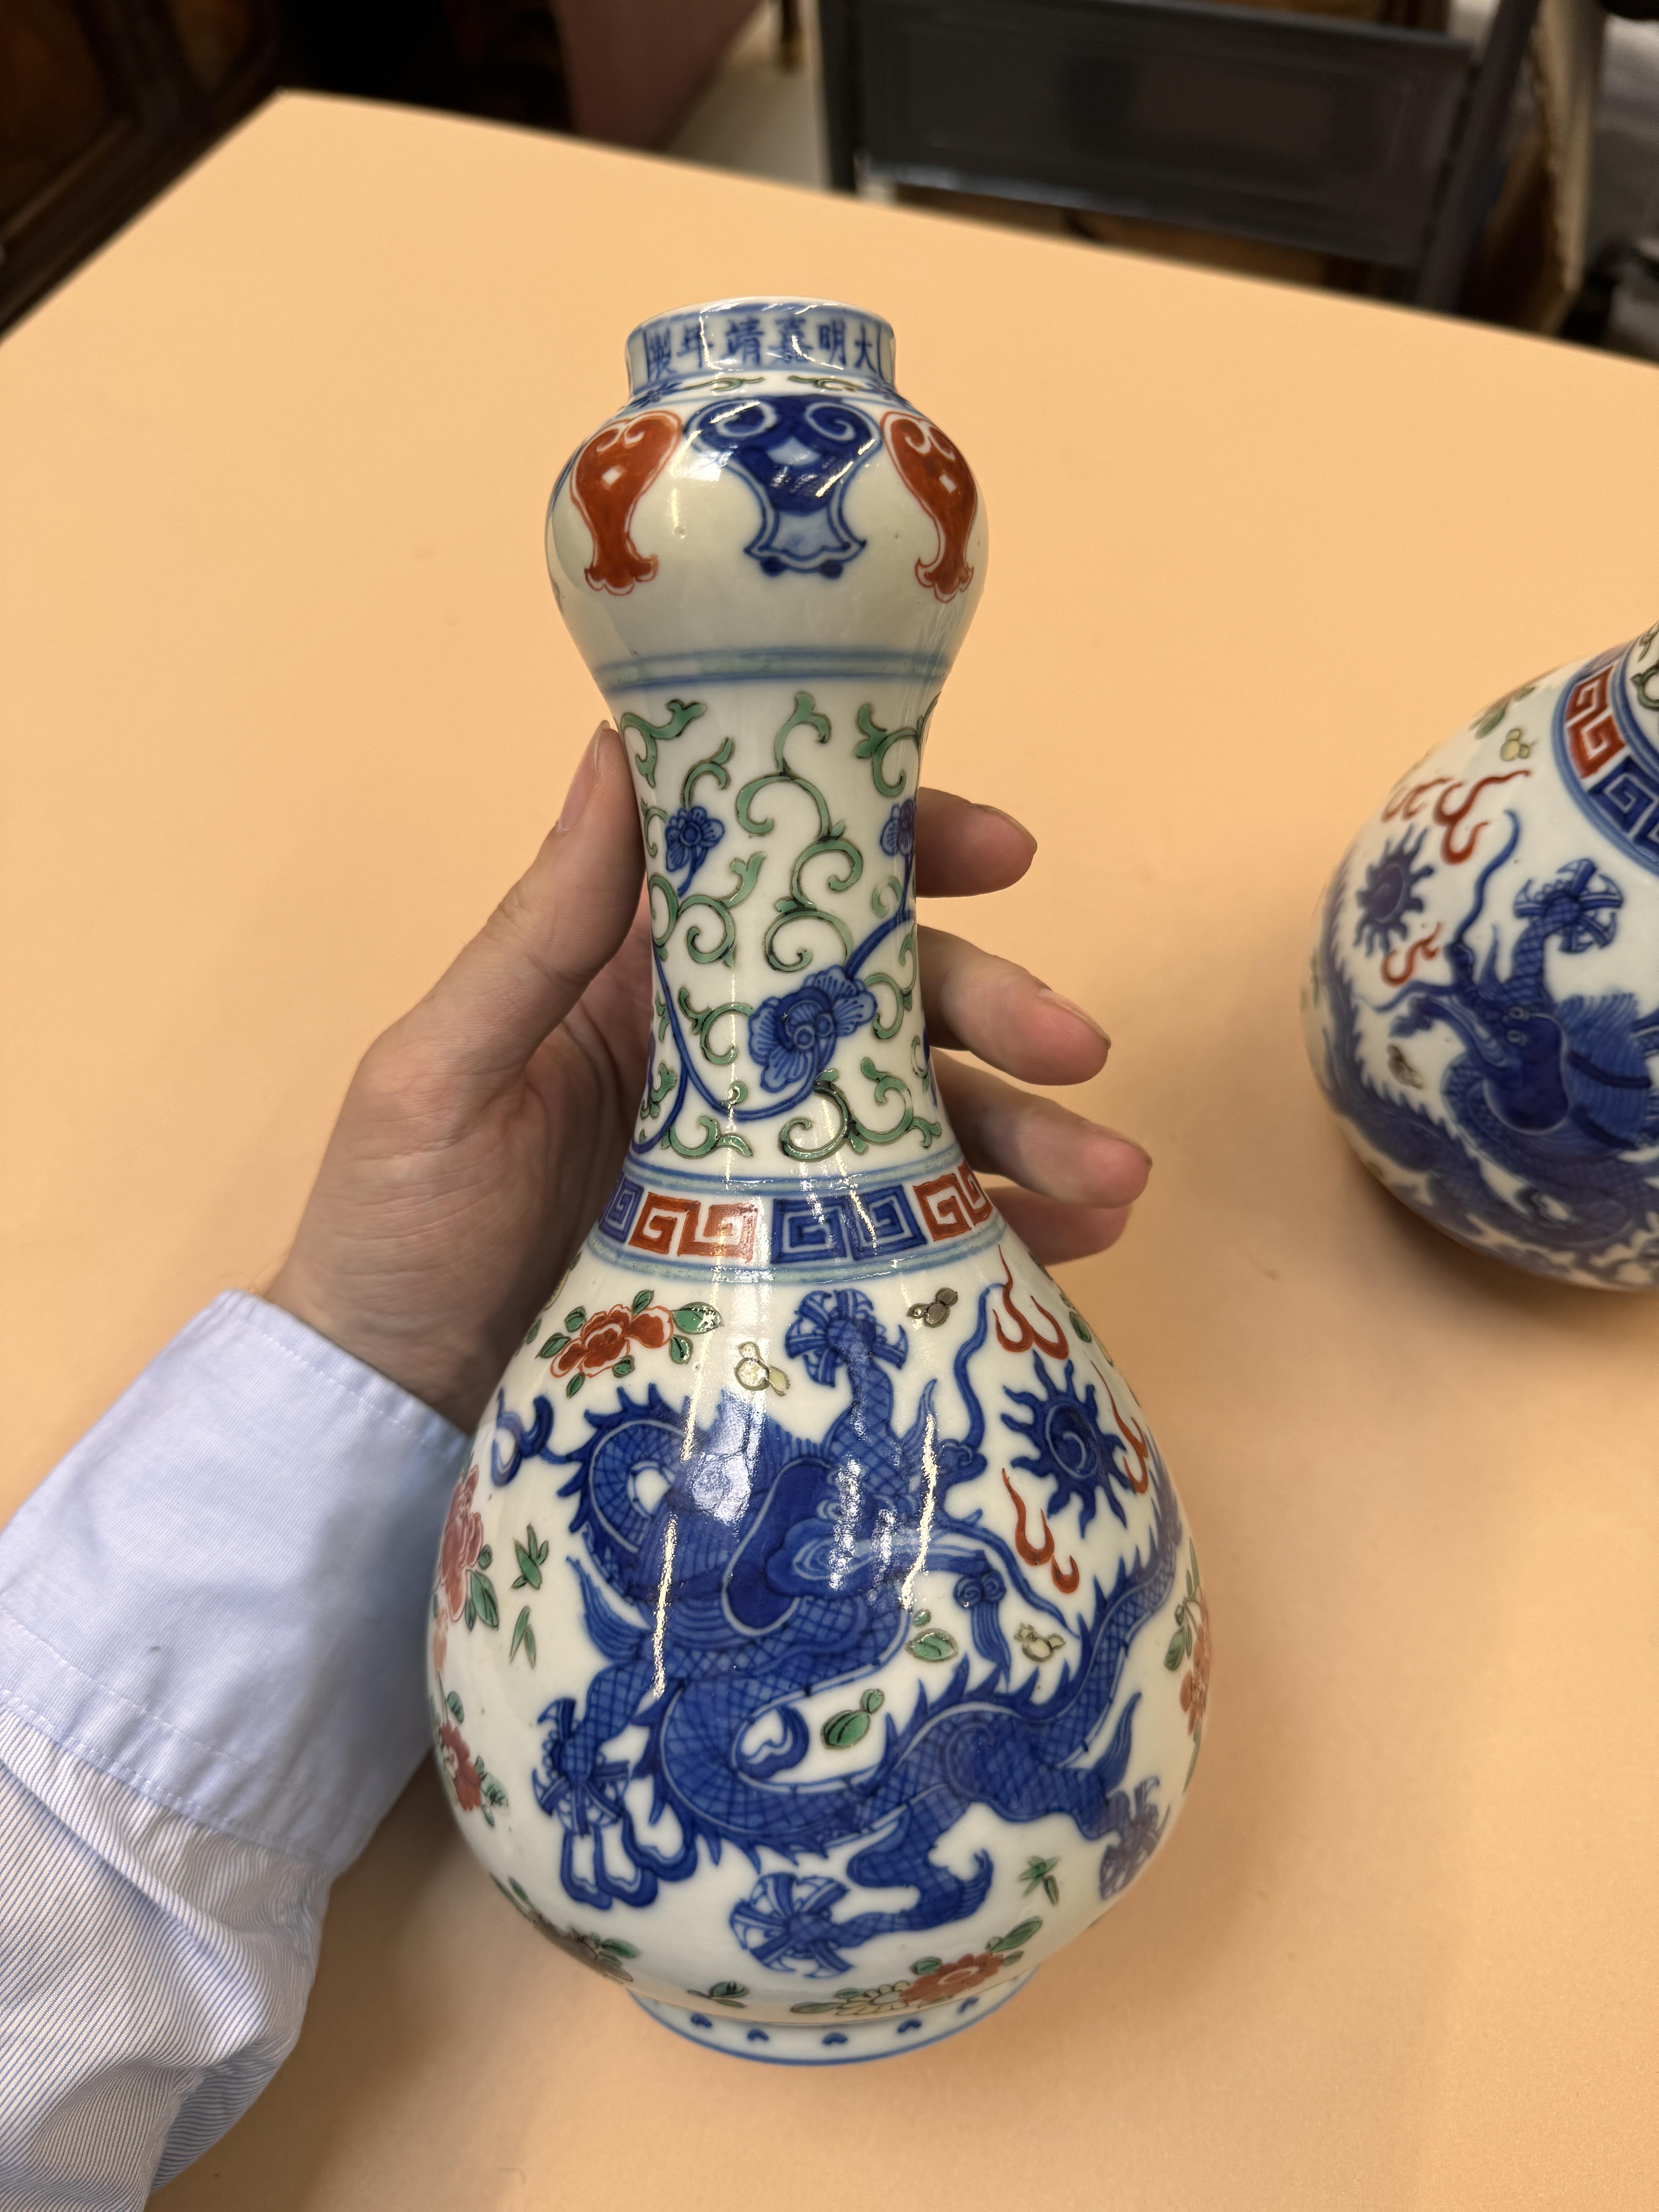 A PAIR OF CHINESE WUCAI 'DRAGON' VASES 民國時期 五彩龍趕珠紋瓶一對 《大明嘉靖年製》款 - Image 18 of 19